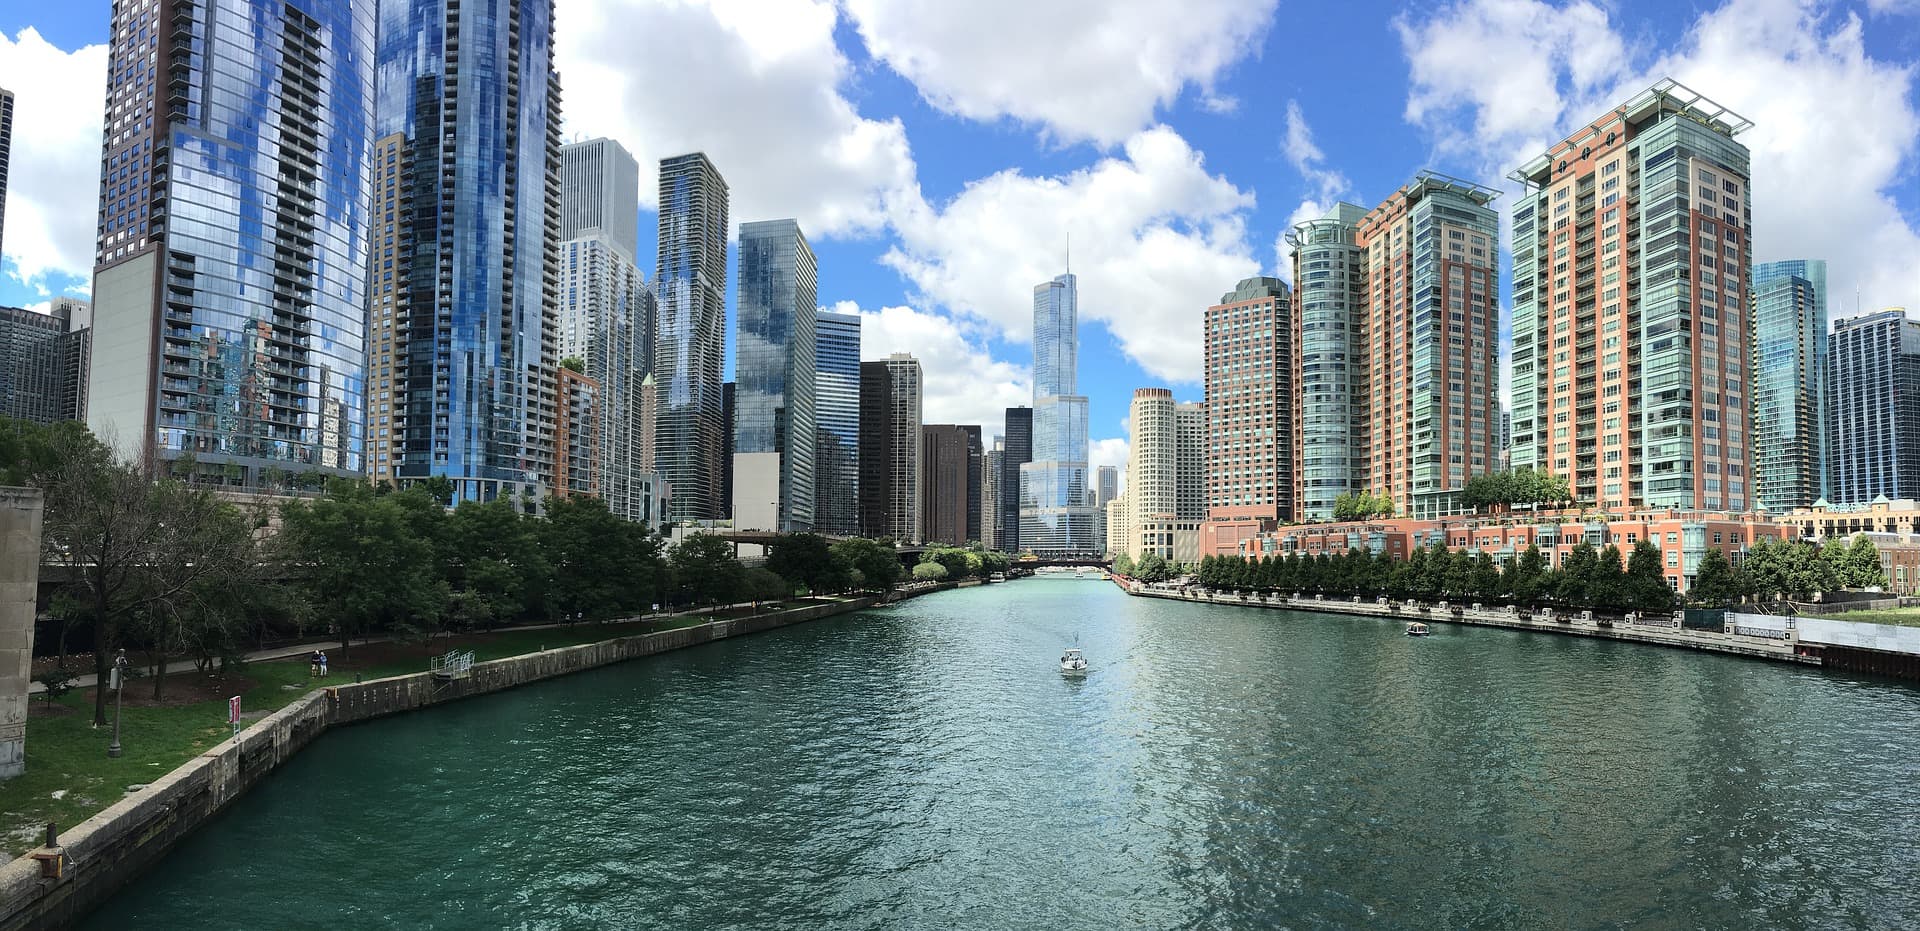 6 Benefits of Investing Property in Chicago